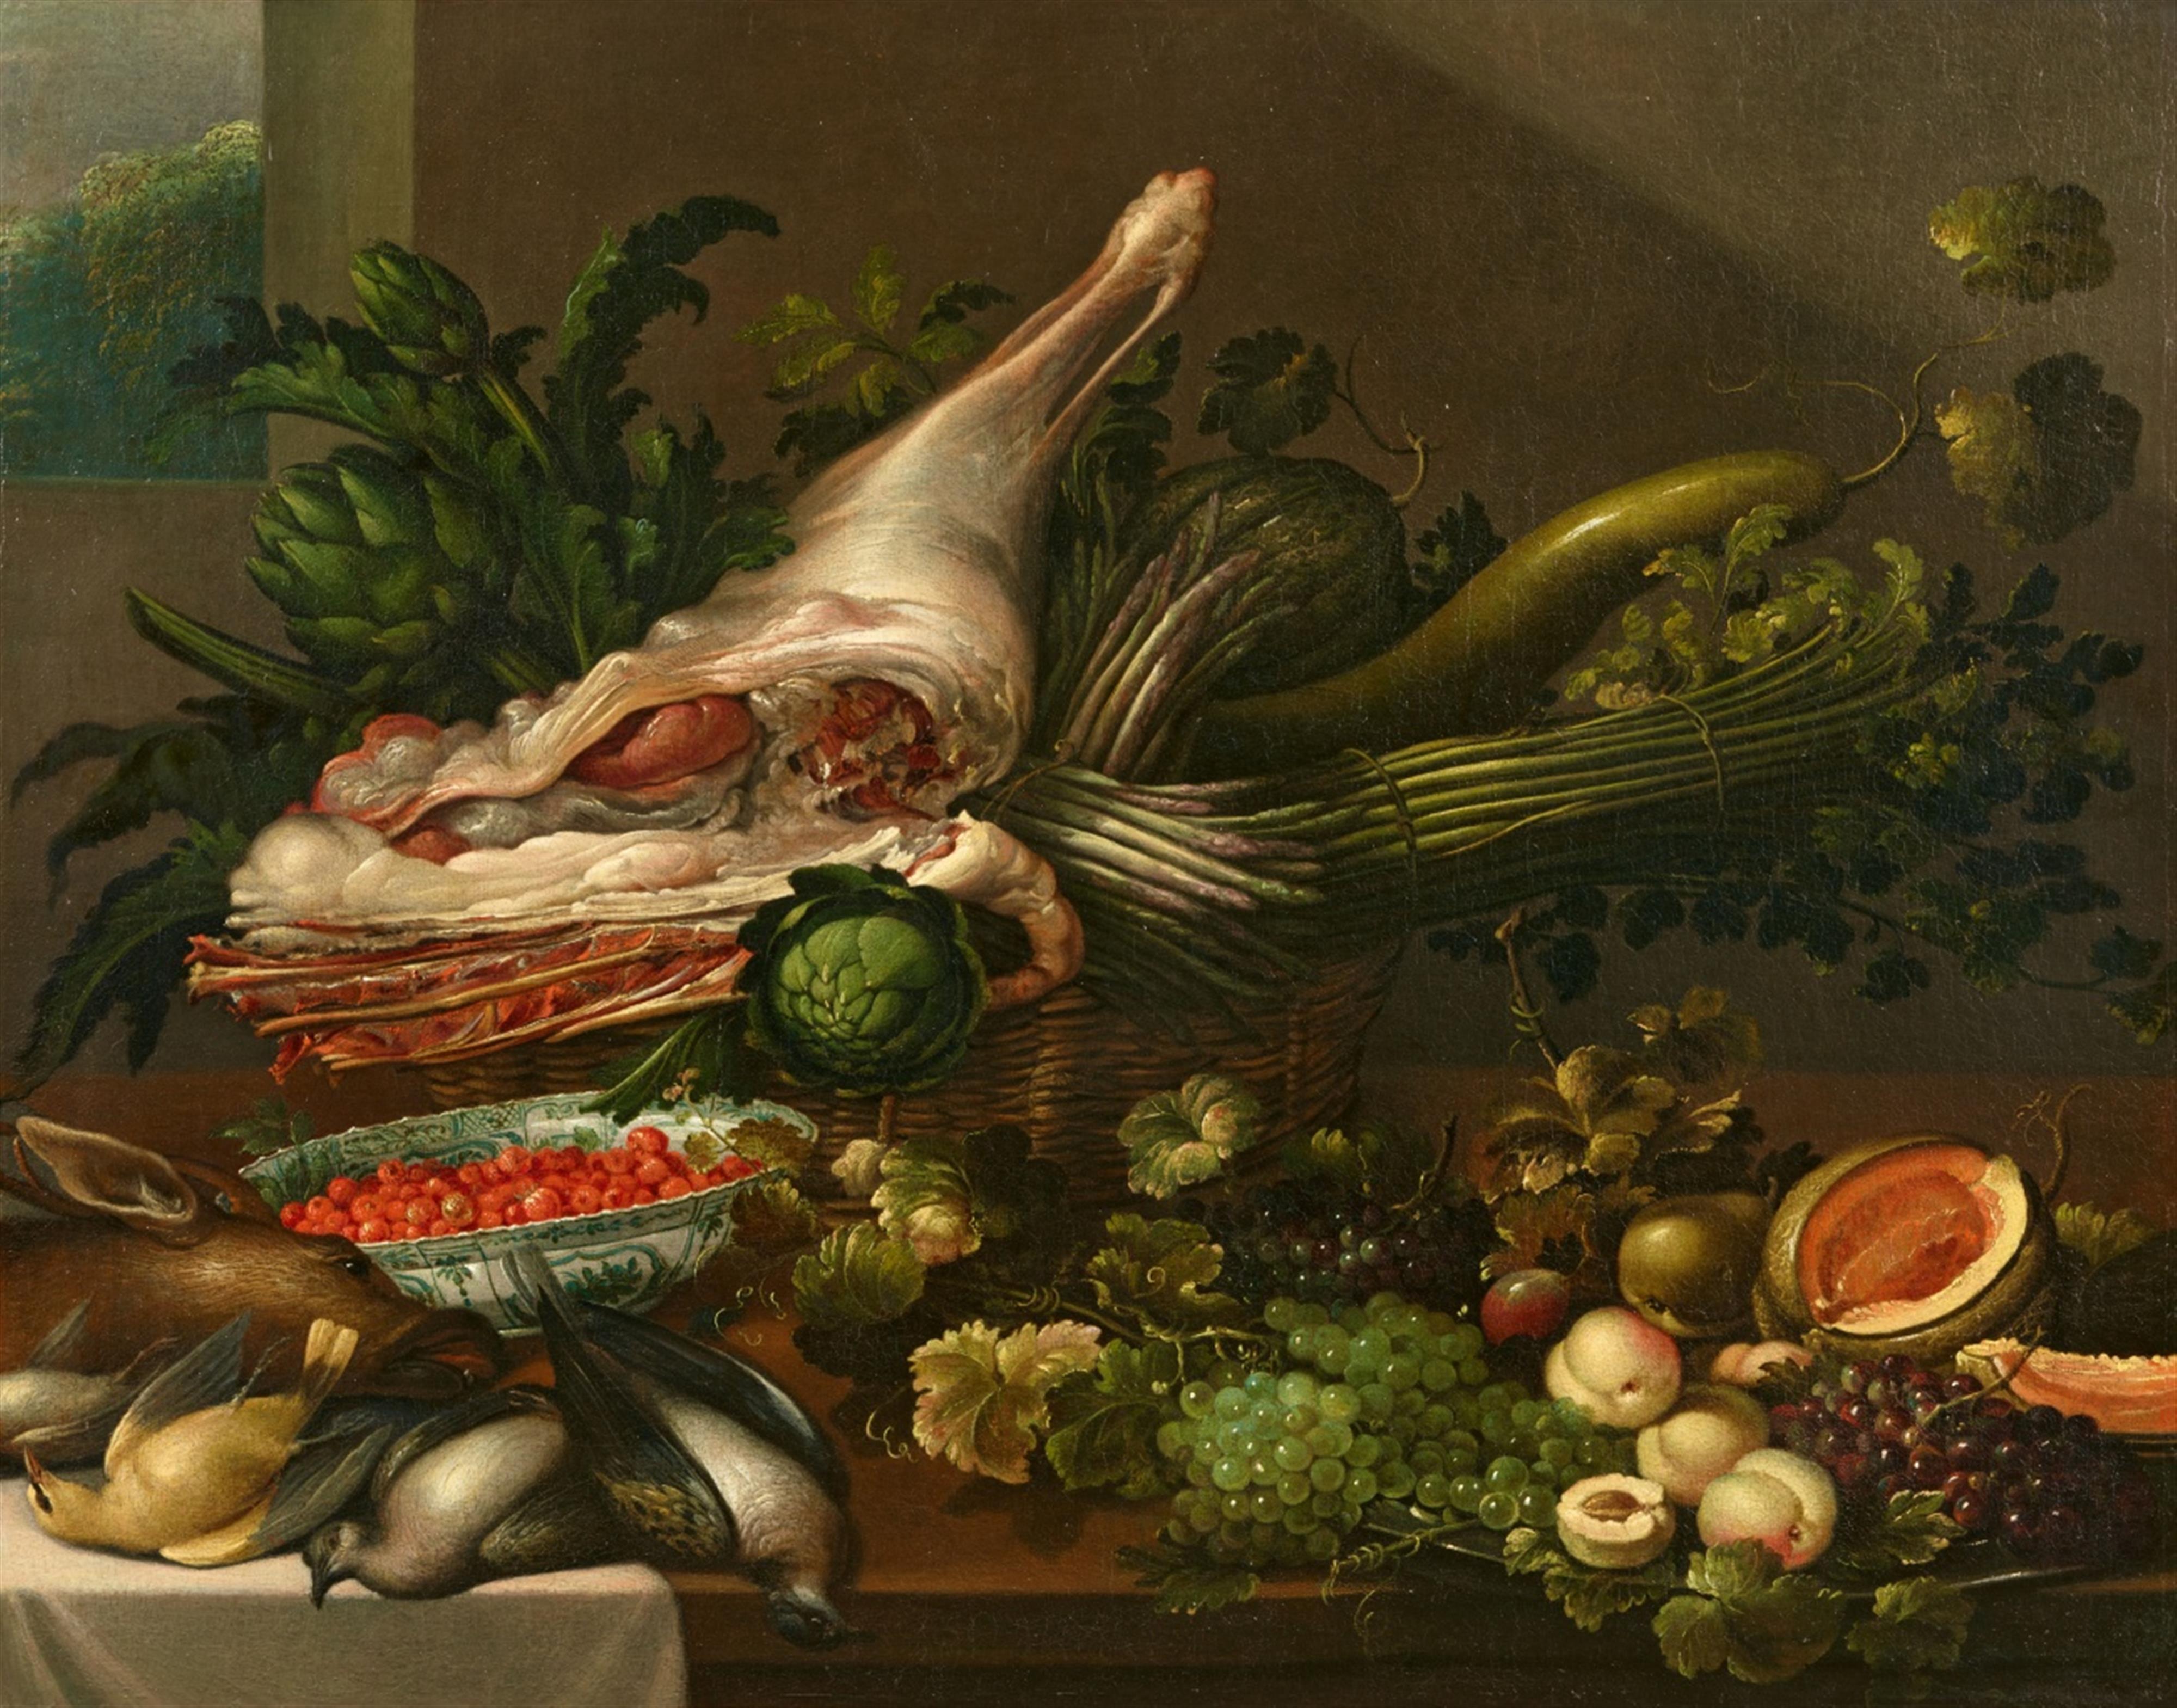 Adriaen van Utrecht, circle of - Still Life with Game board, Artichokes, Asparagus, Pumpkin, Watermelon, Grapes, Peaches and a Bowl filled with Raspberries on a Table - image-1